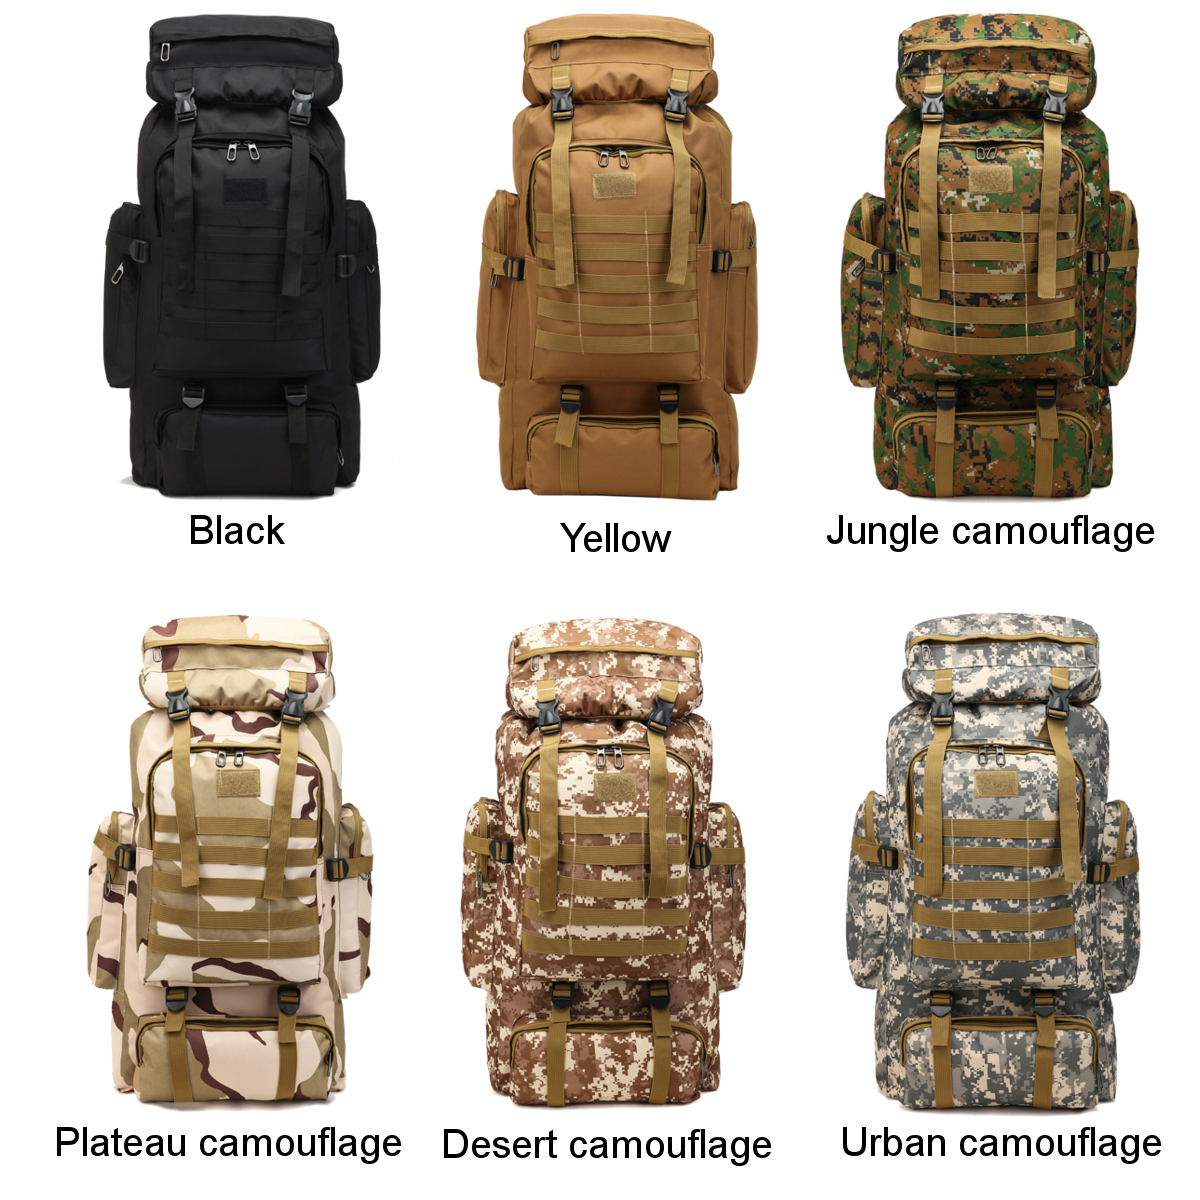 Military Tactical Backpack Novashion 80L Large Capacity Camping Hiking Backpack Rucksack Waterproof Traveling Daypack for Outdoor, Gift for Boy and Girl - image 2 of 8